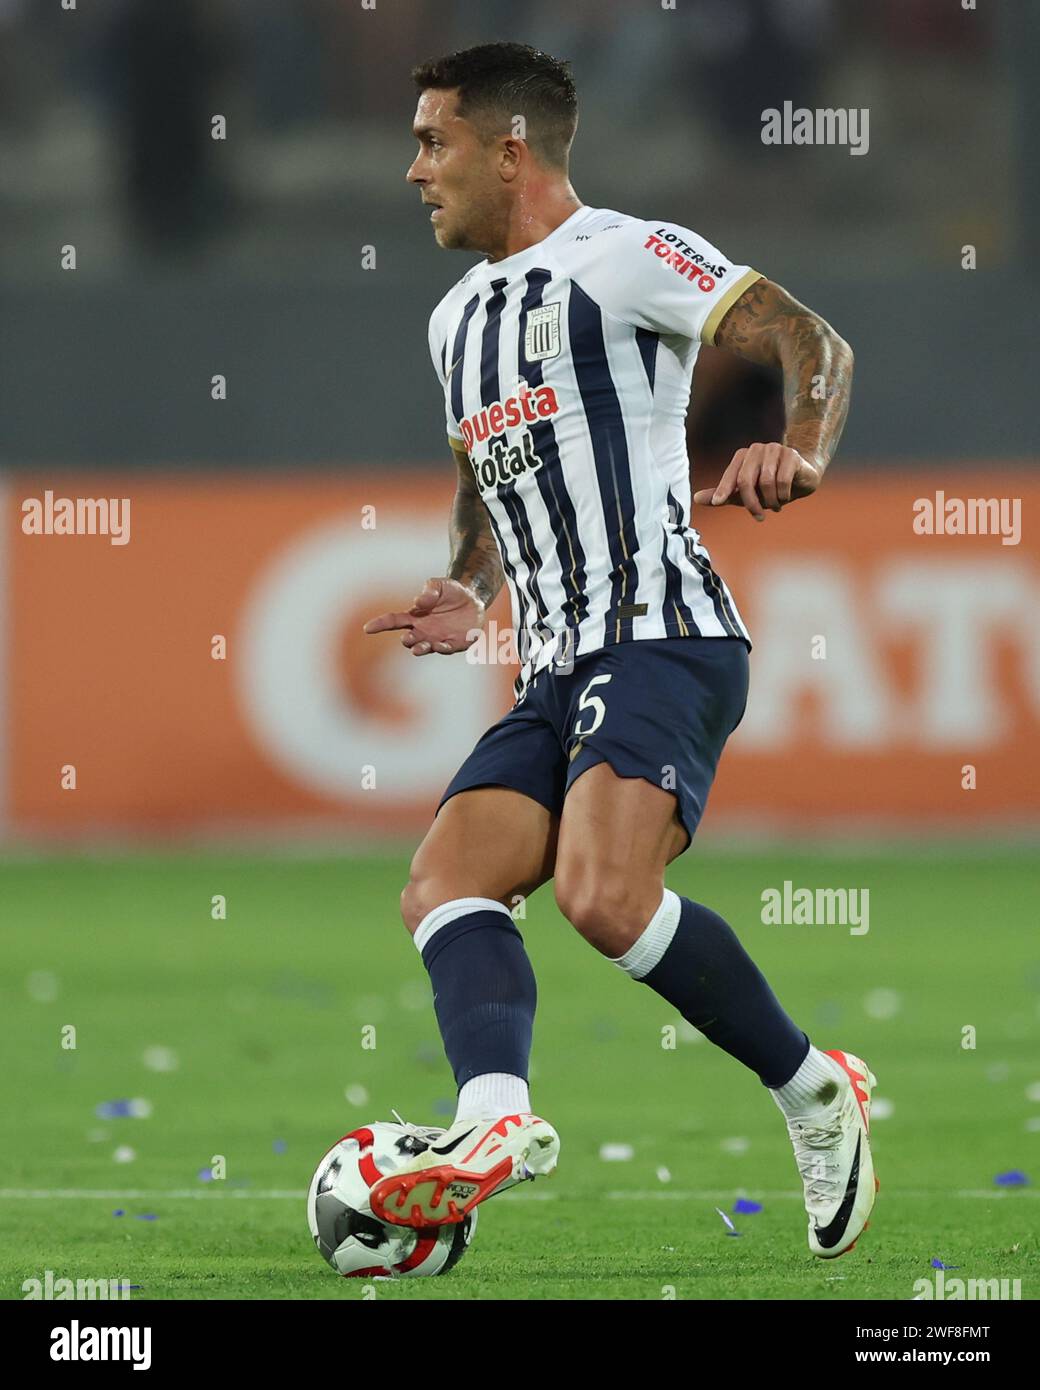 Adrian Arregui of Alianza Lima during the Liga 1 match between Alianza de Lima and Cesar Vallejo played at Nacional Stadium on January 28, 2024 in Lima, Peru. (Photo by Miguel Marrufo / PRESSINPHOTO) Stock Photo